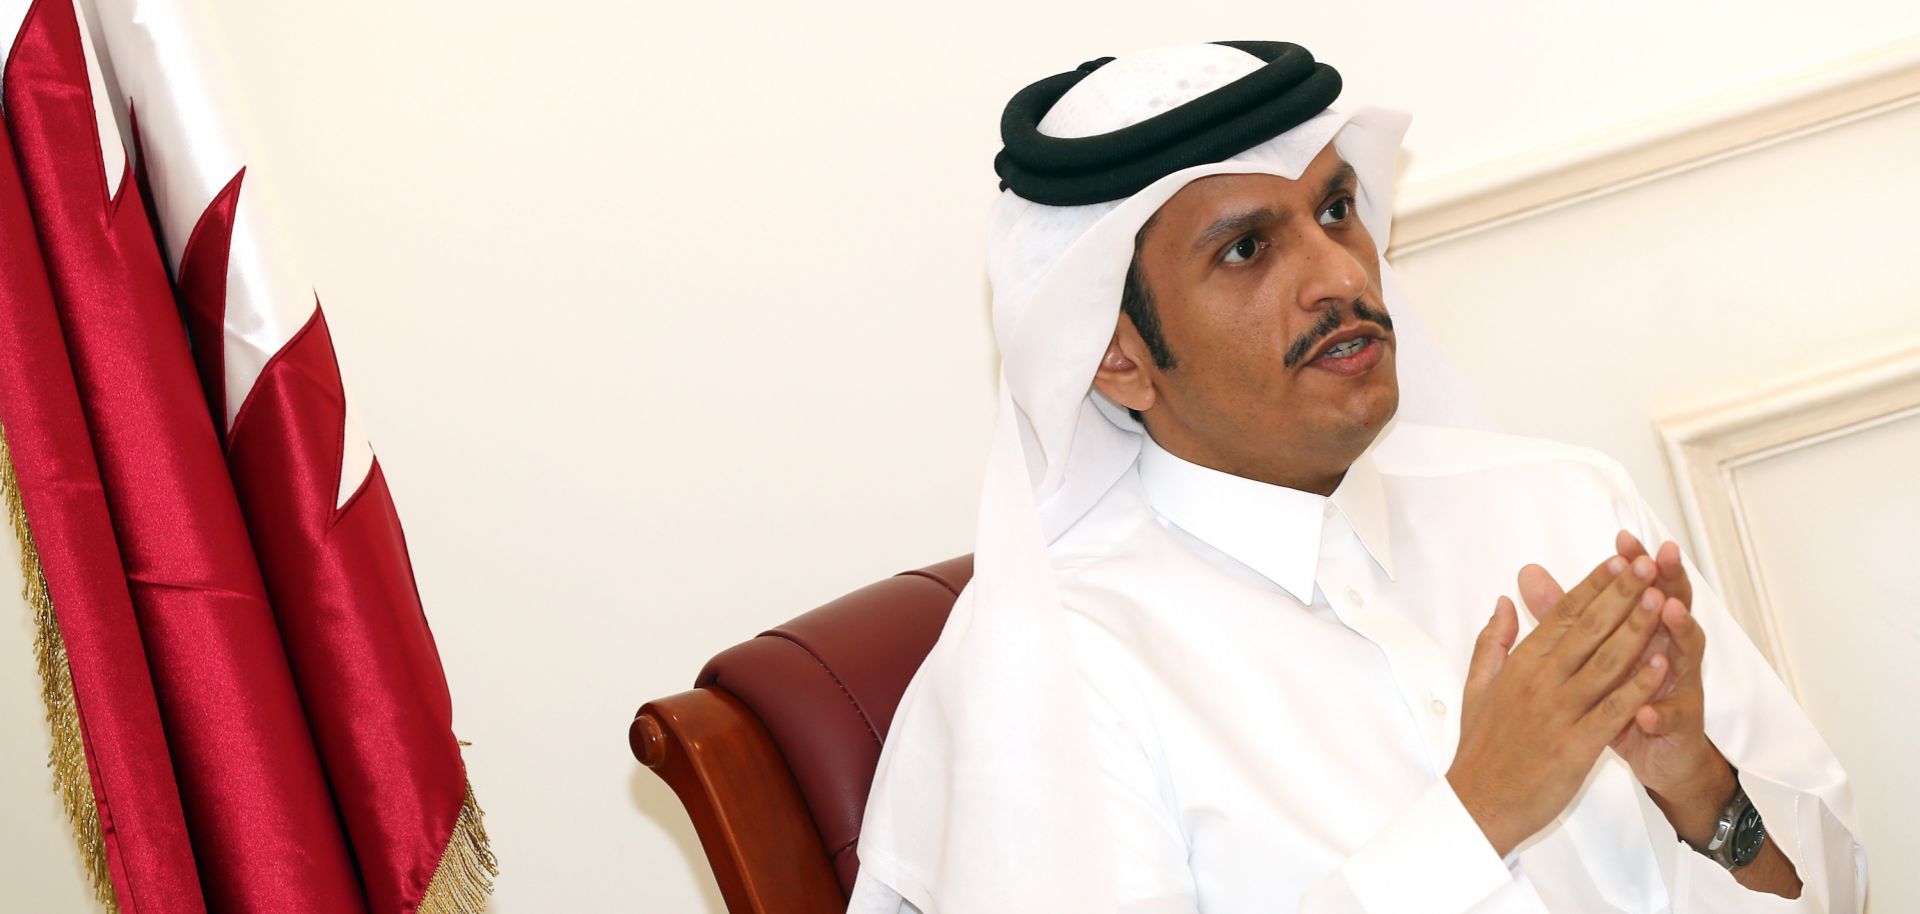 Sheikh Mohammed bin Abdulrahman al-Thani, Qatar's foreign minister, talks with journalists in Doha. The country's dispute with Saudi Arabia has forced states in and beyond the region to pick a side.